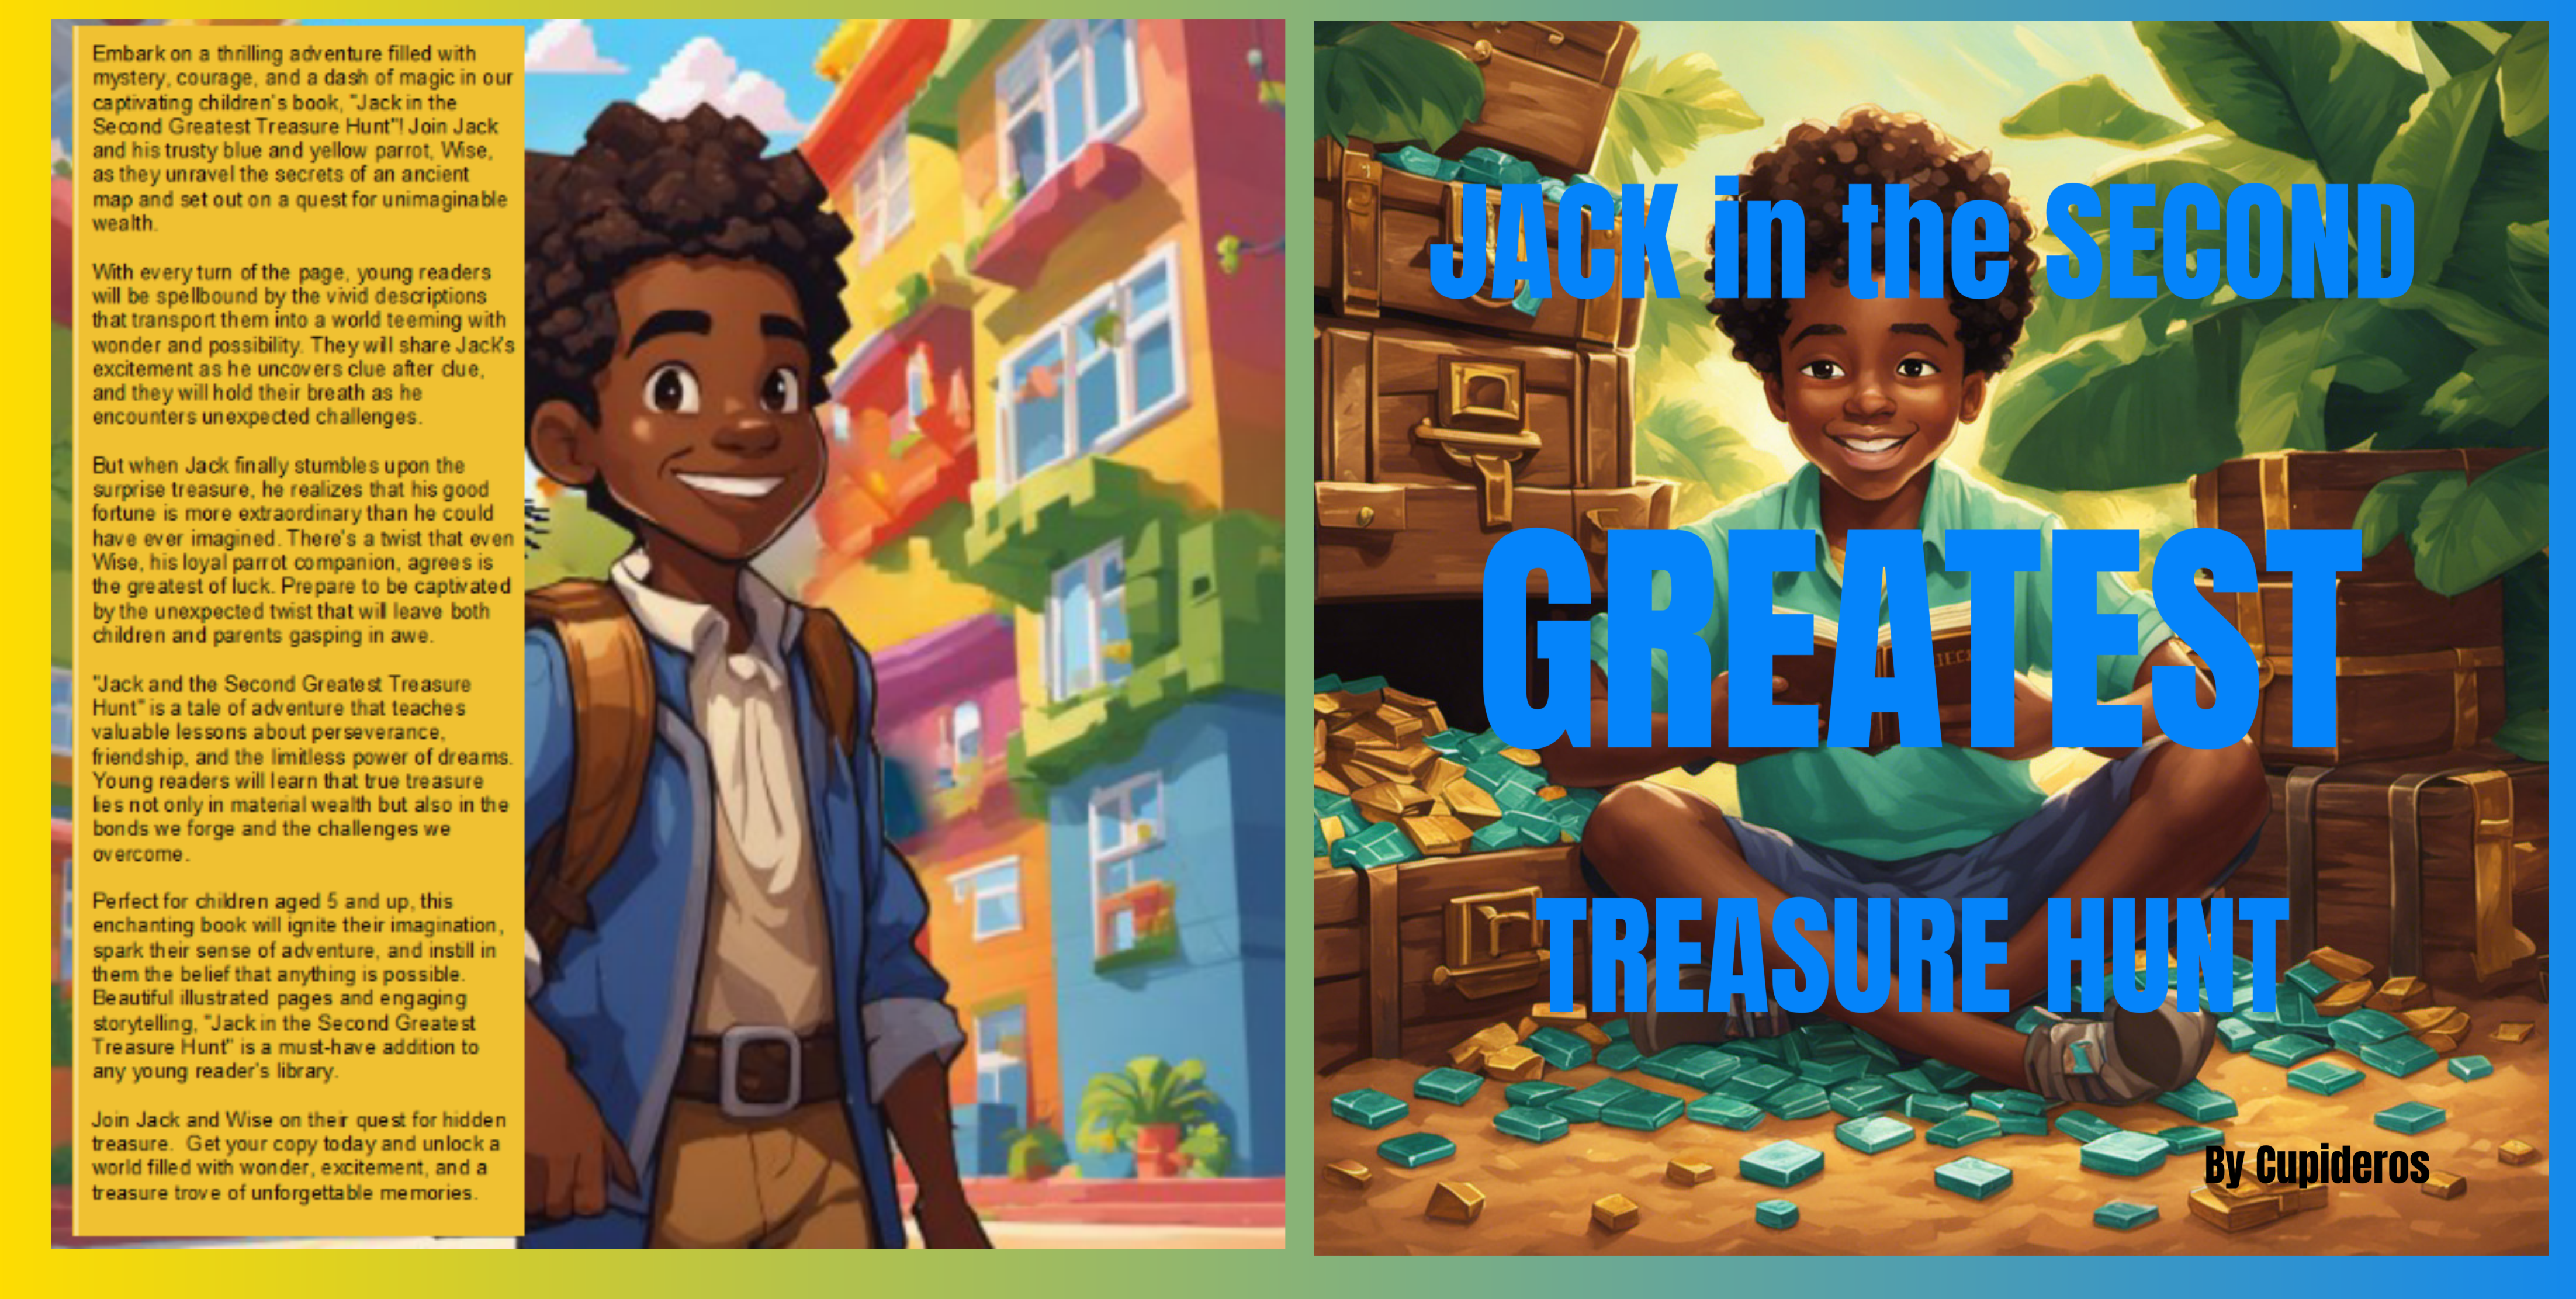 OUT IN PAPERBACK!  Jack in The Second Greatest Treasure Hunt by Cupideros